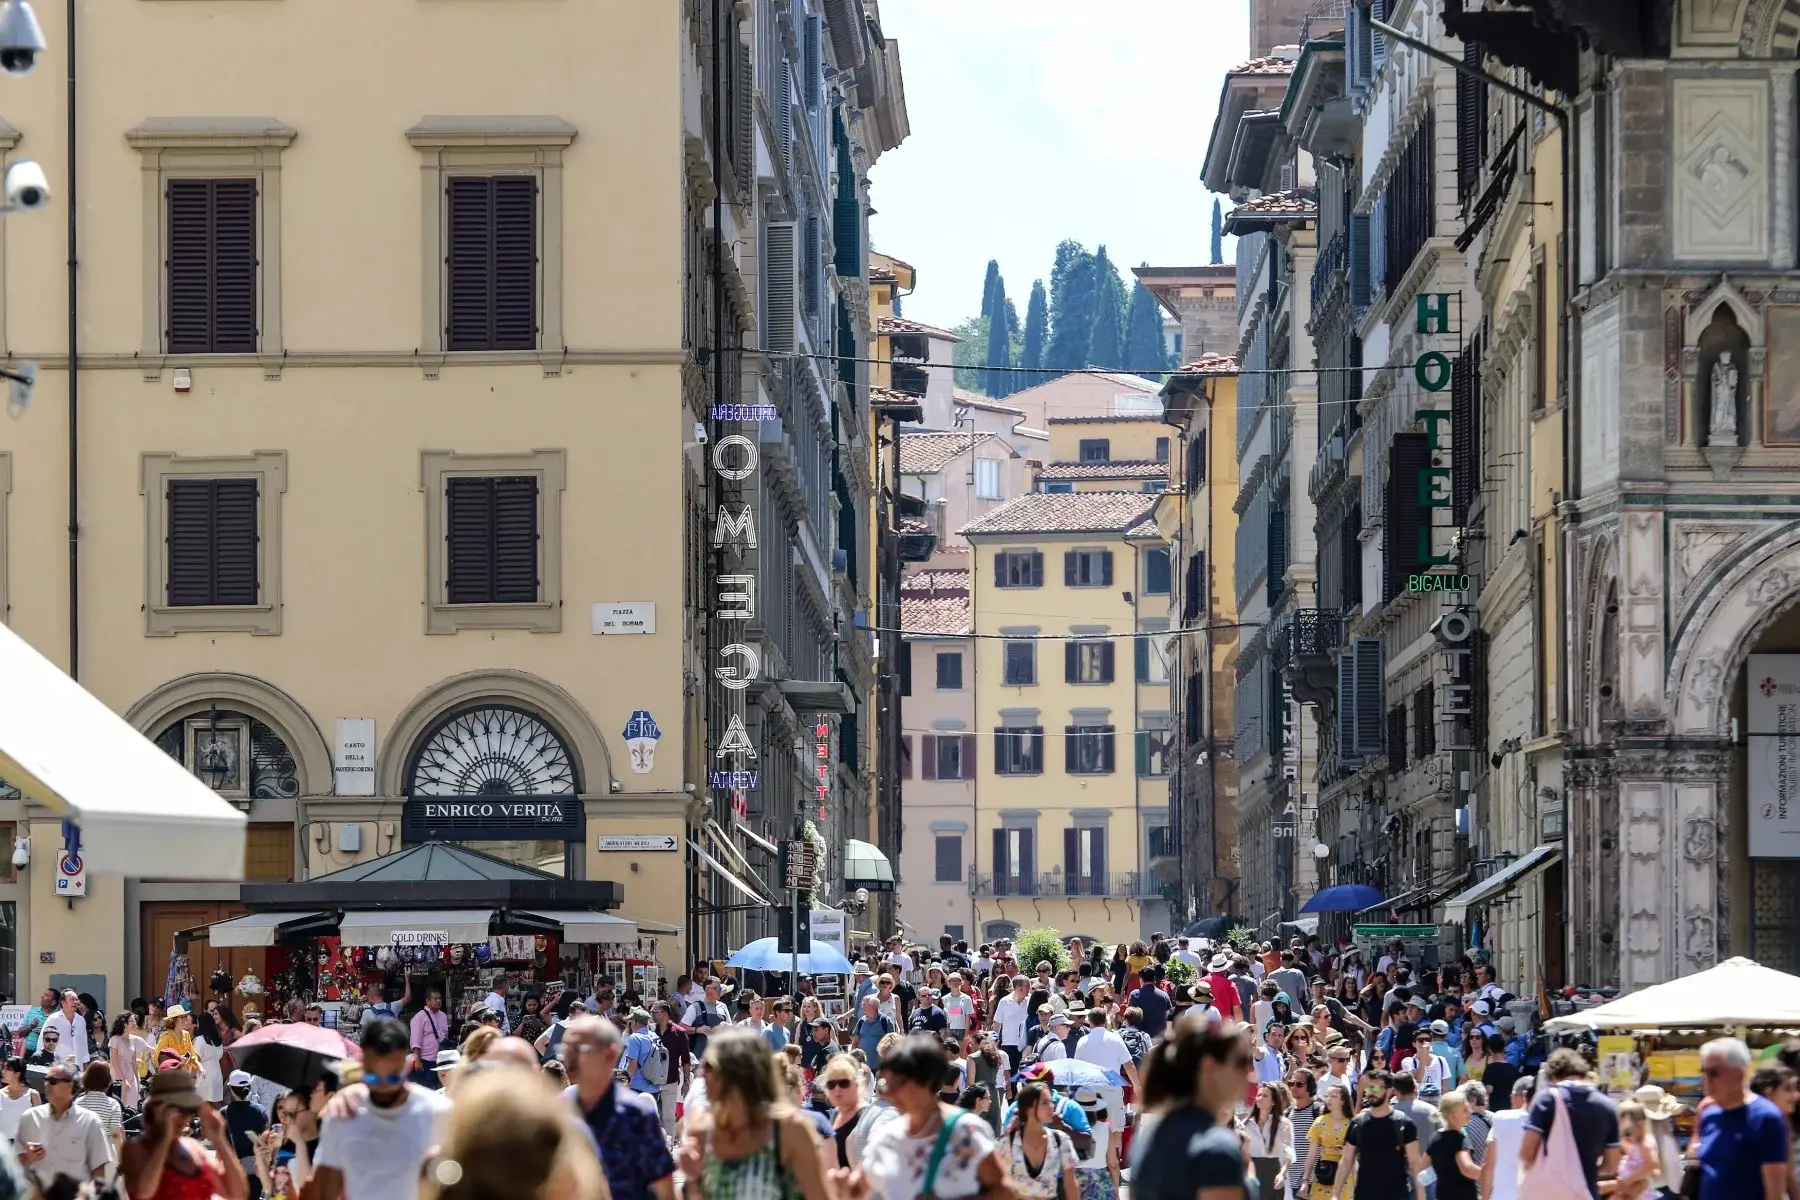 Crowded street in the city center (Centro) of Florence